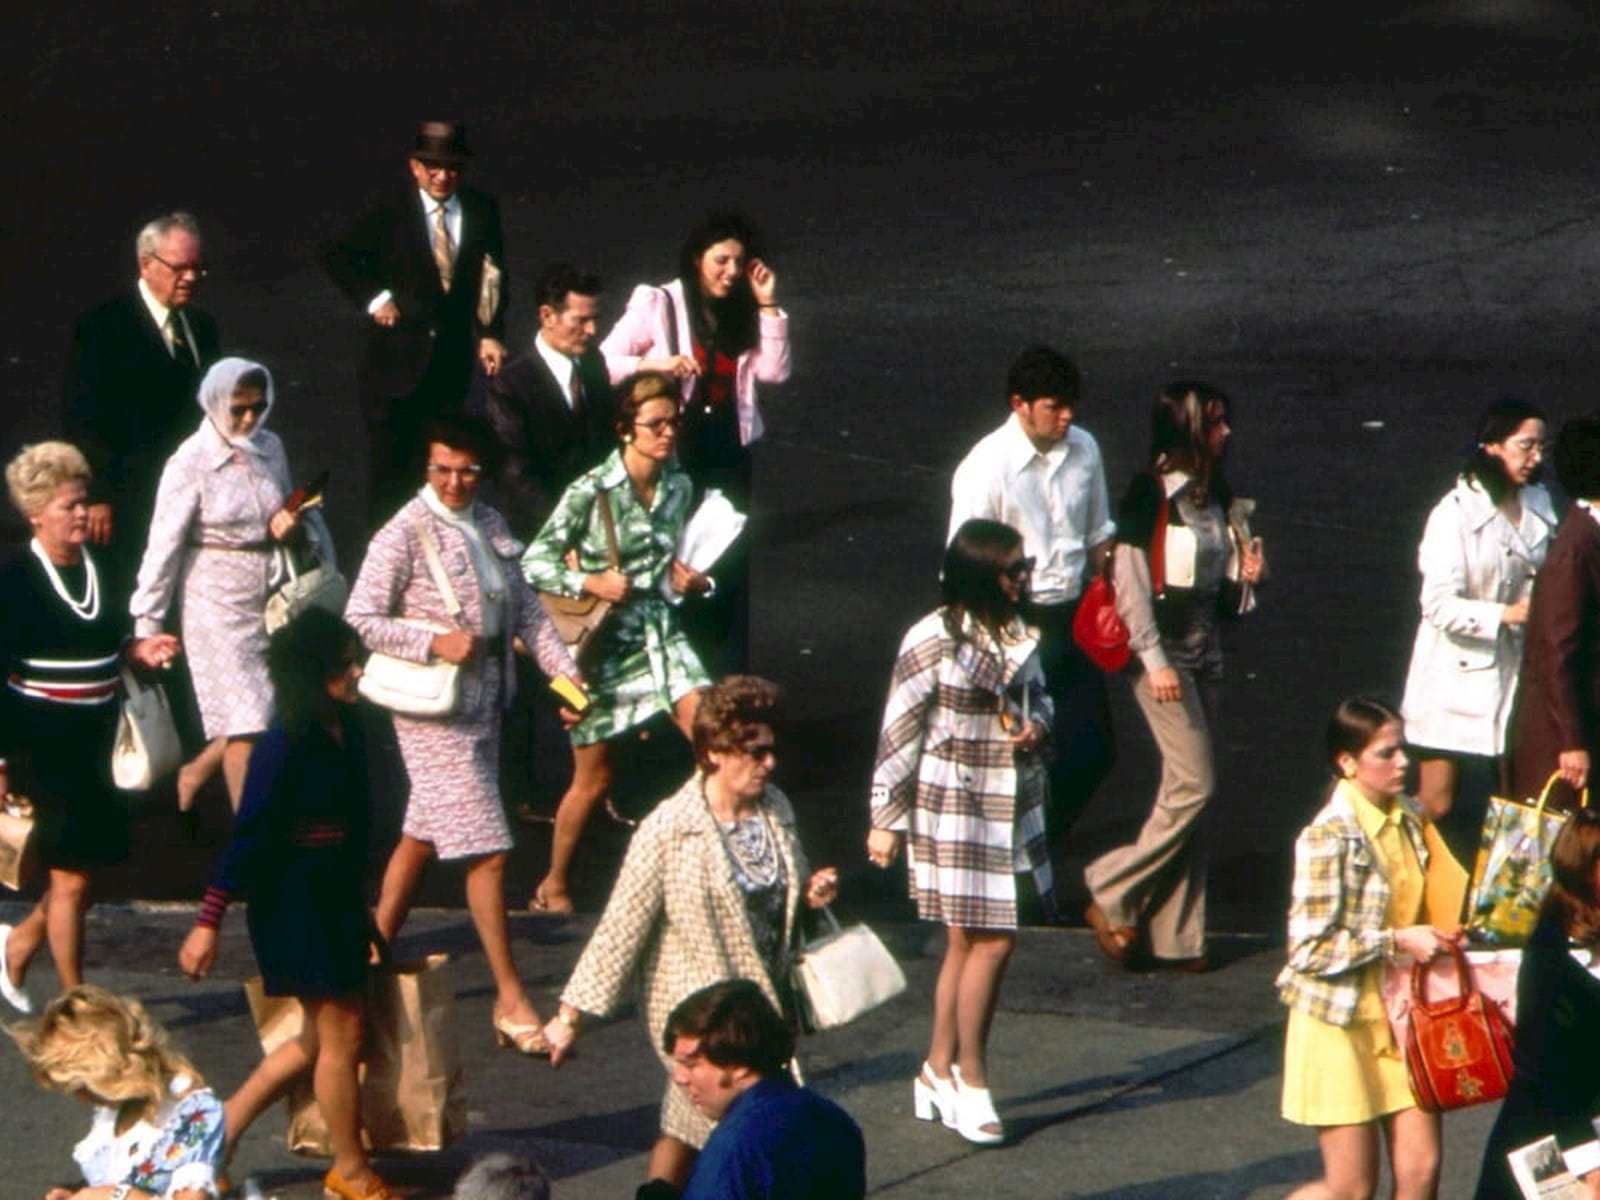 Street scene from the 1970s